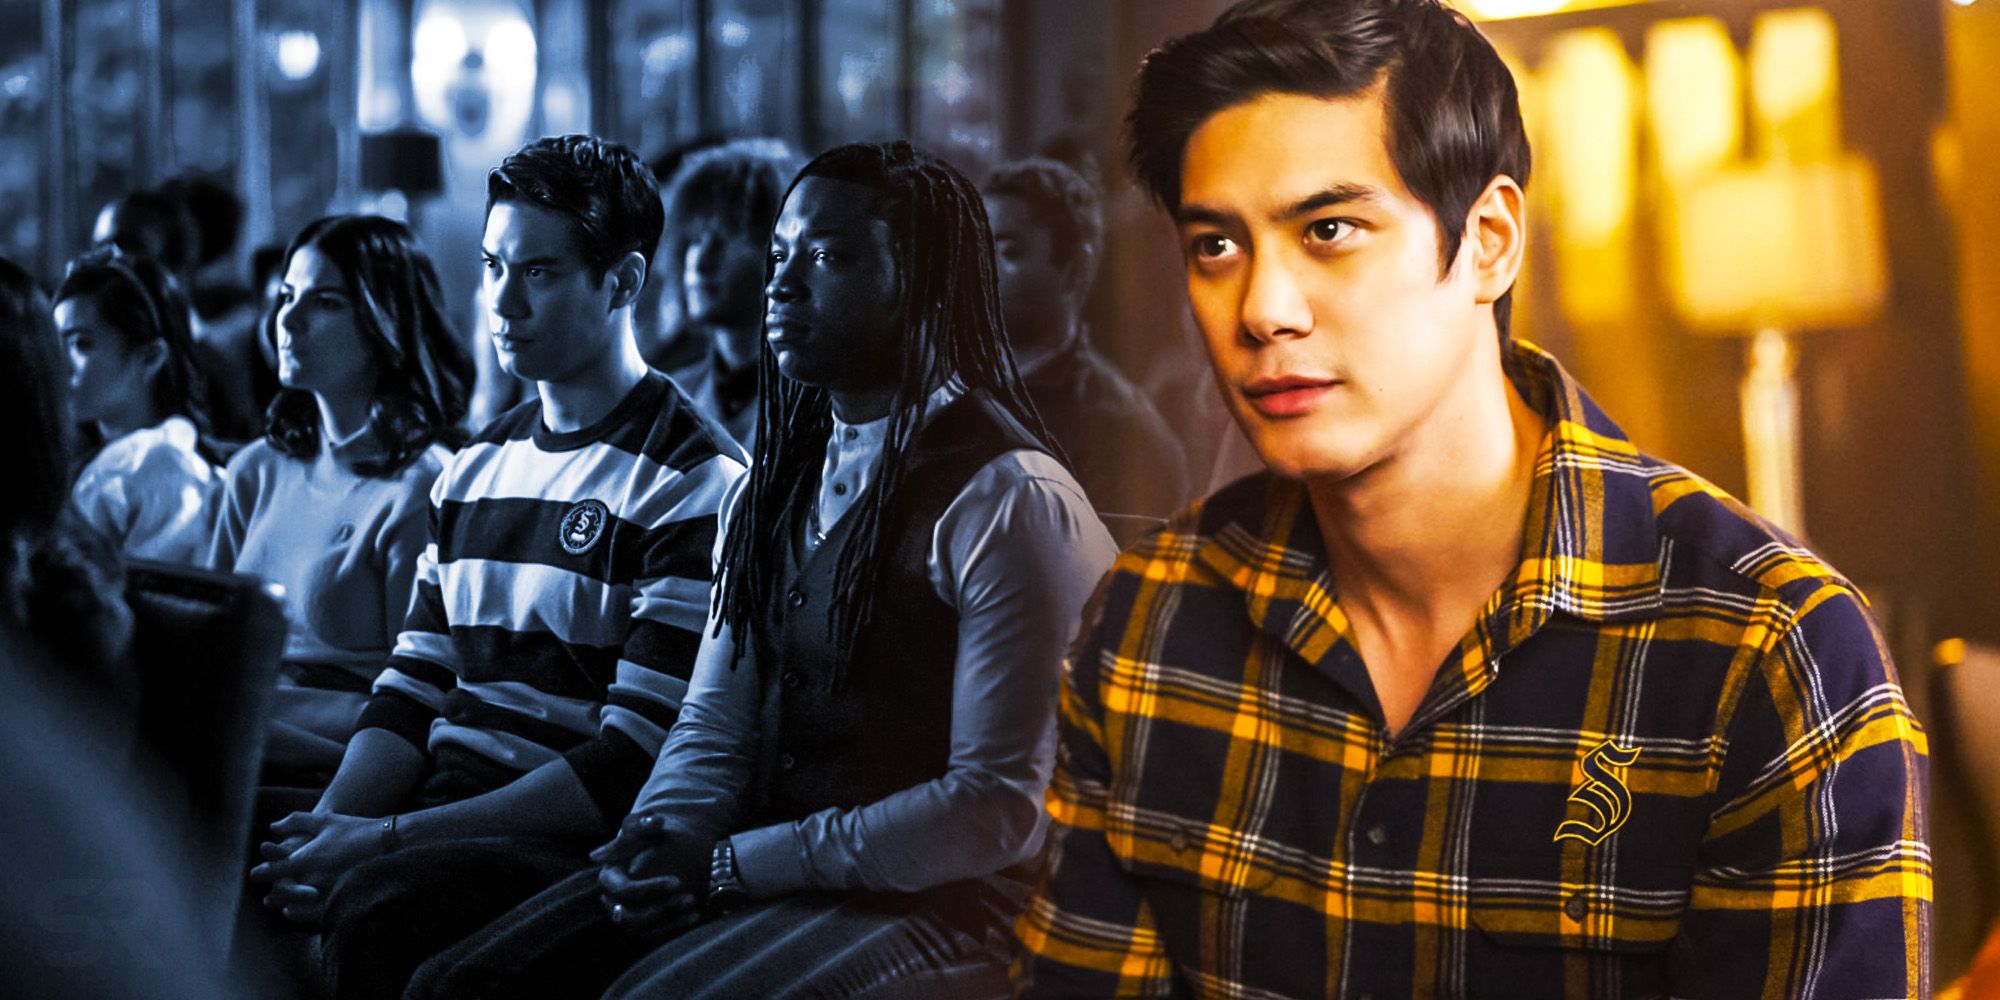 legacies Jed backstory reveal explains why he was a bully